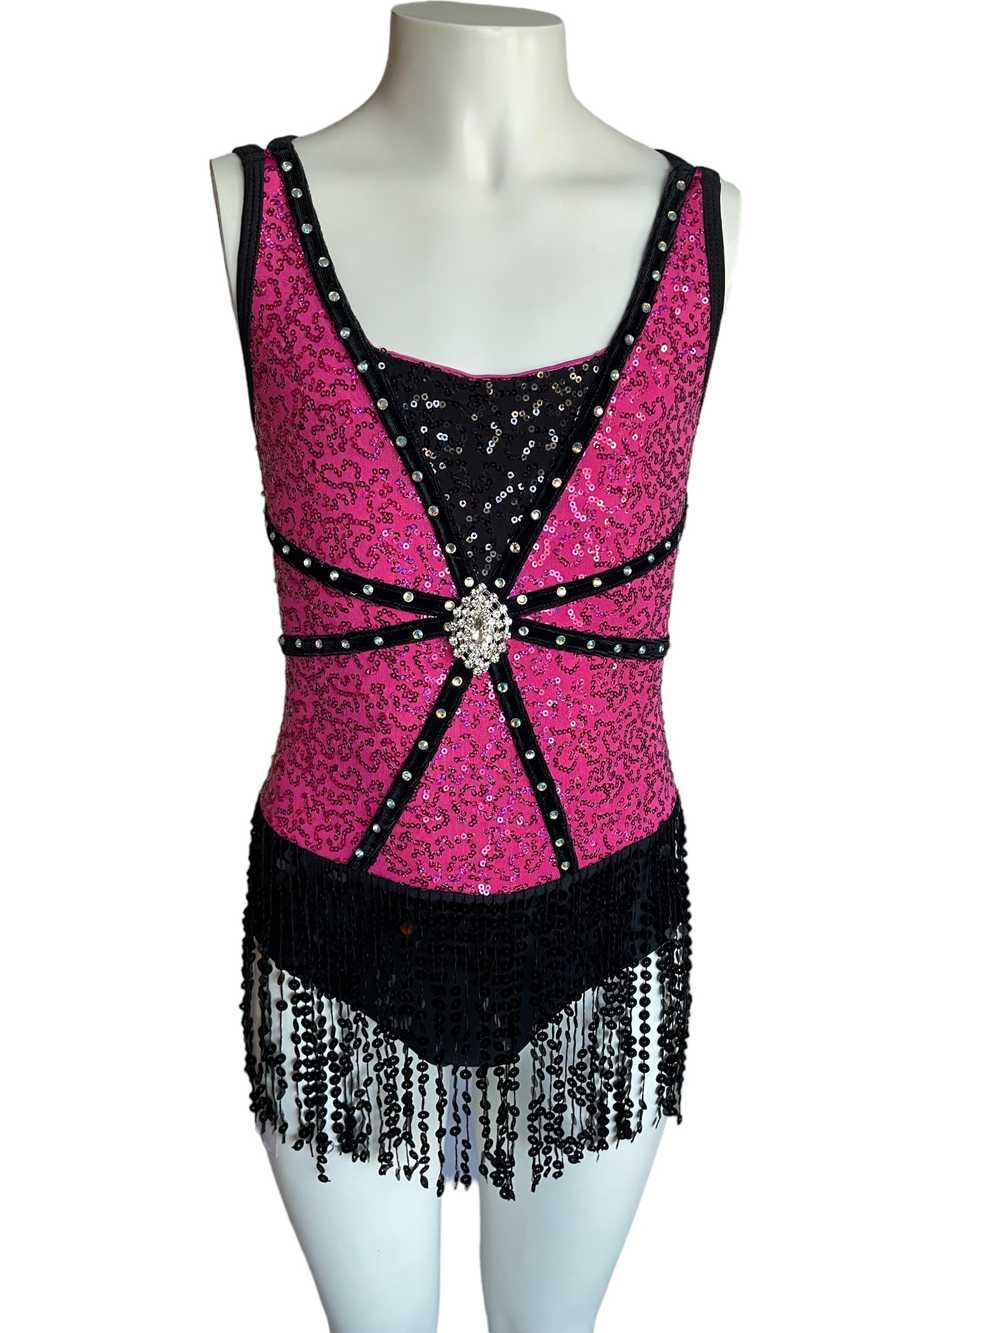 Dance costume - SPICE UP YOUR LIFE - image 2